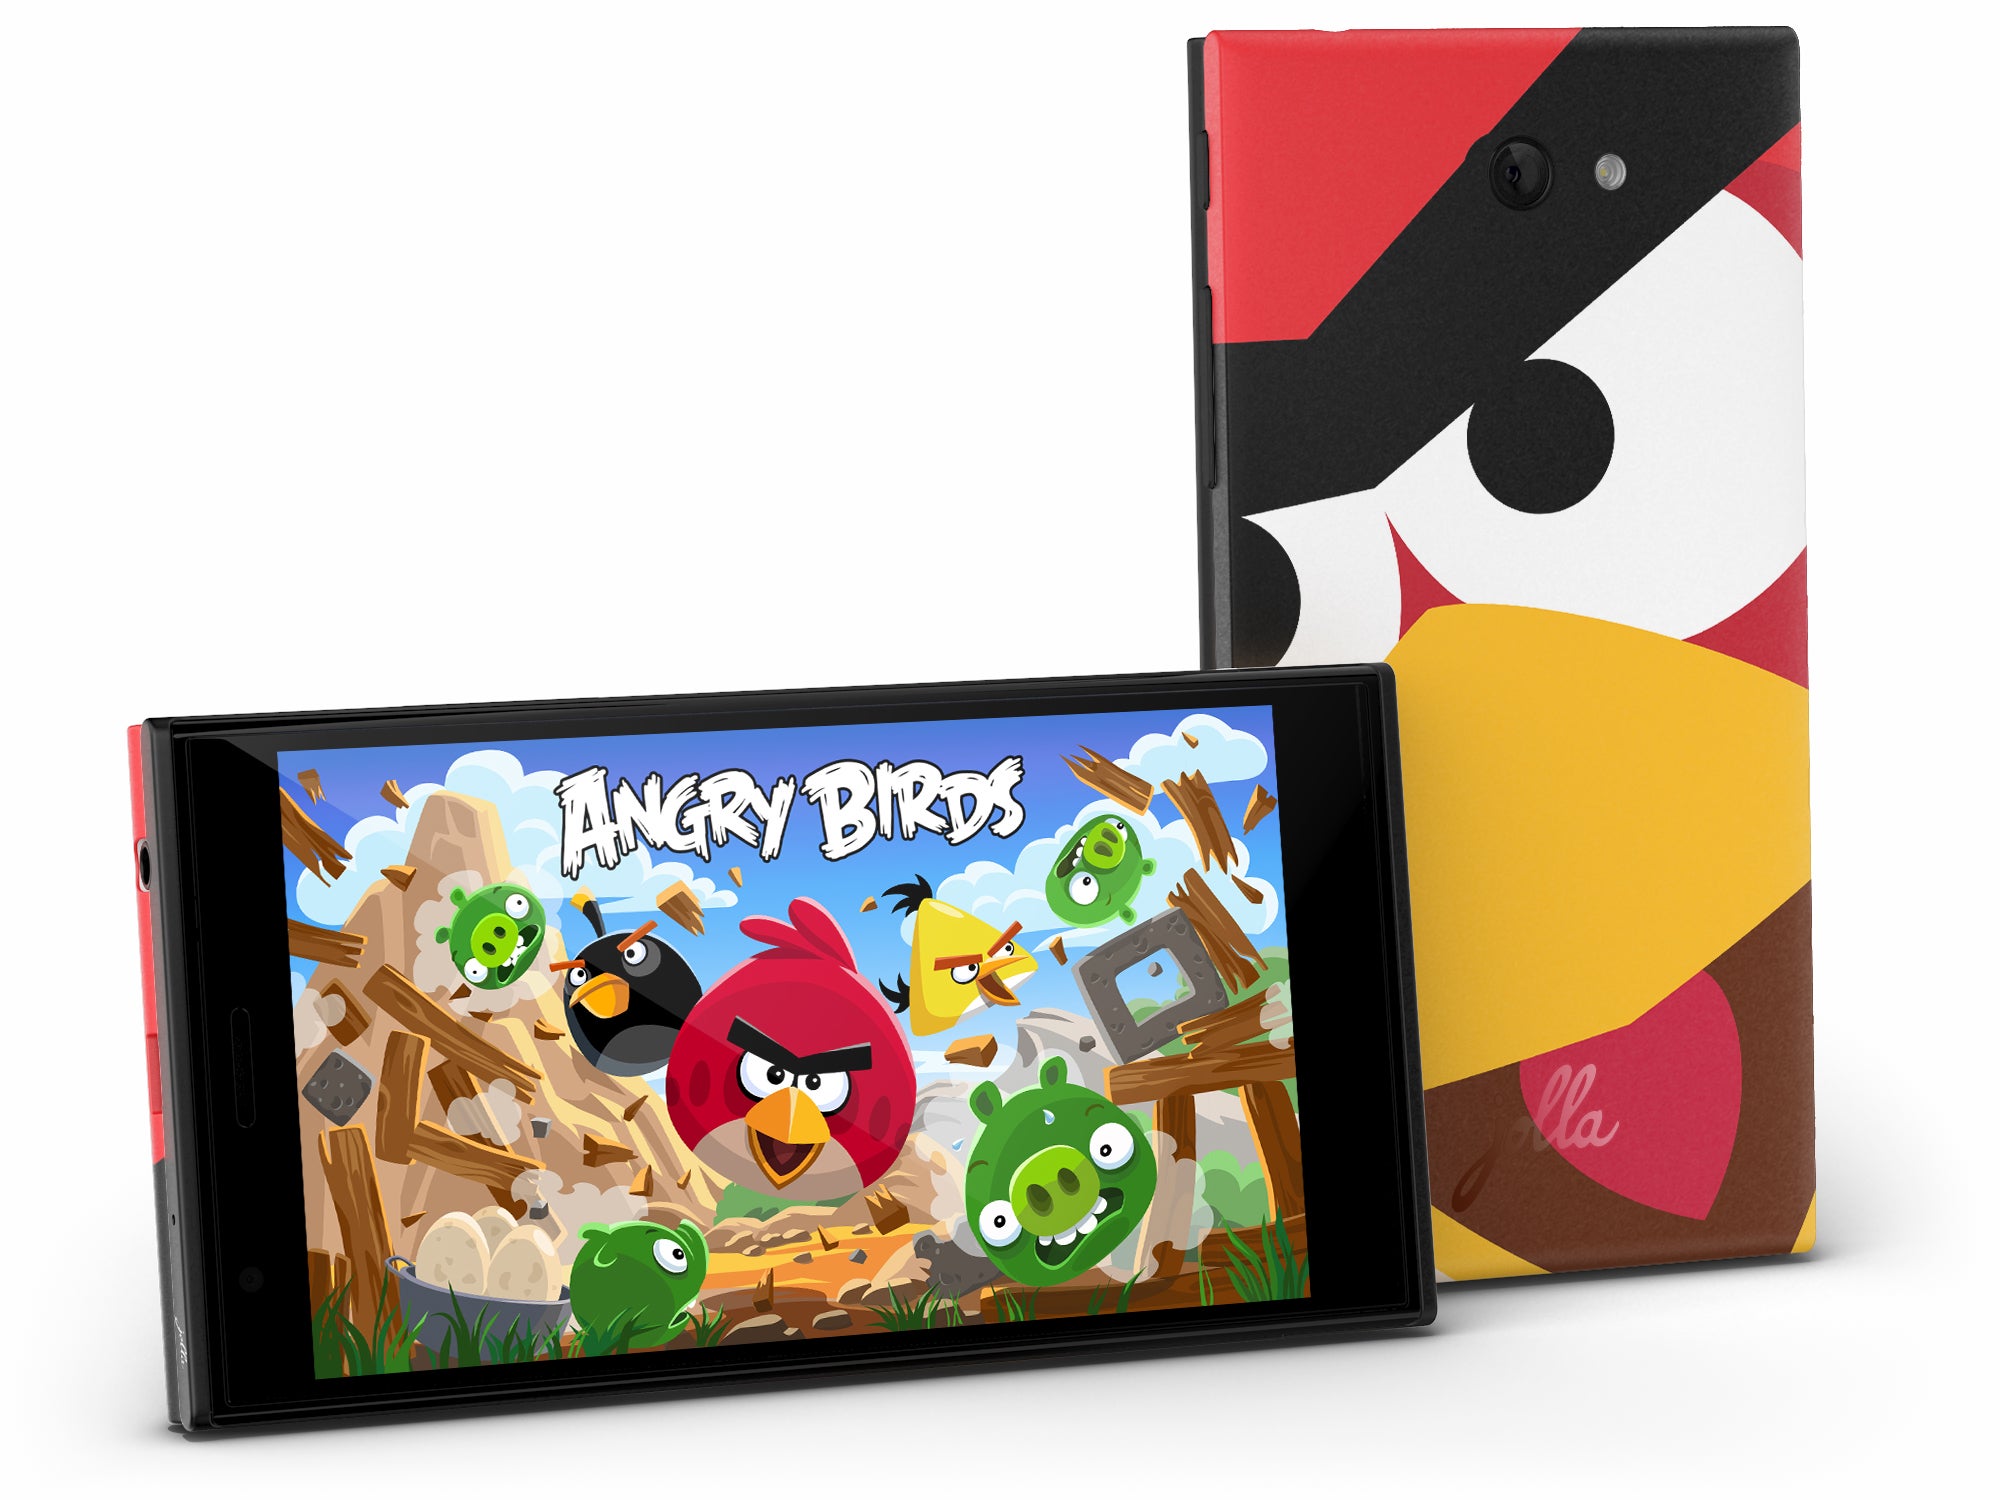 Angry Birds smart-cover - Sailfish OS global distribution, Android install, and Angry Birds smart-cover coming after March update